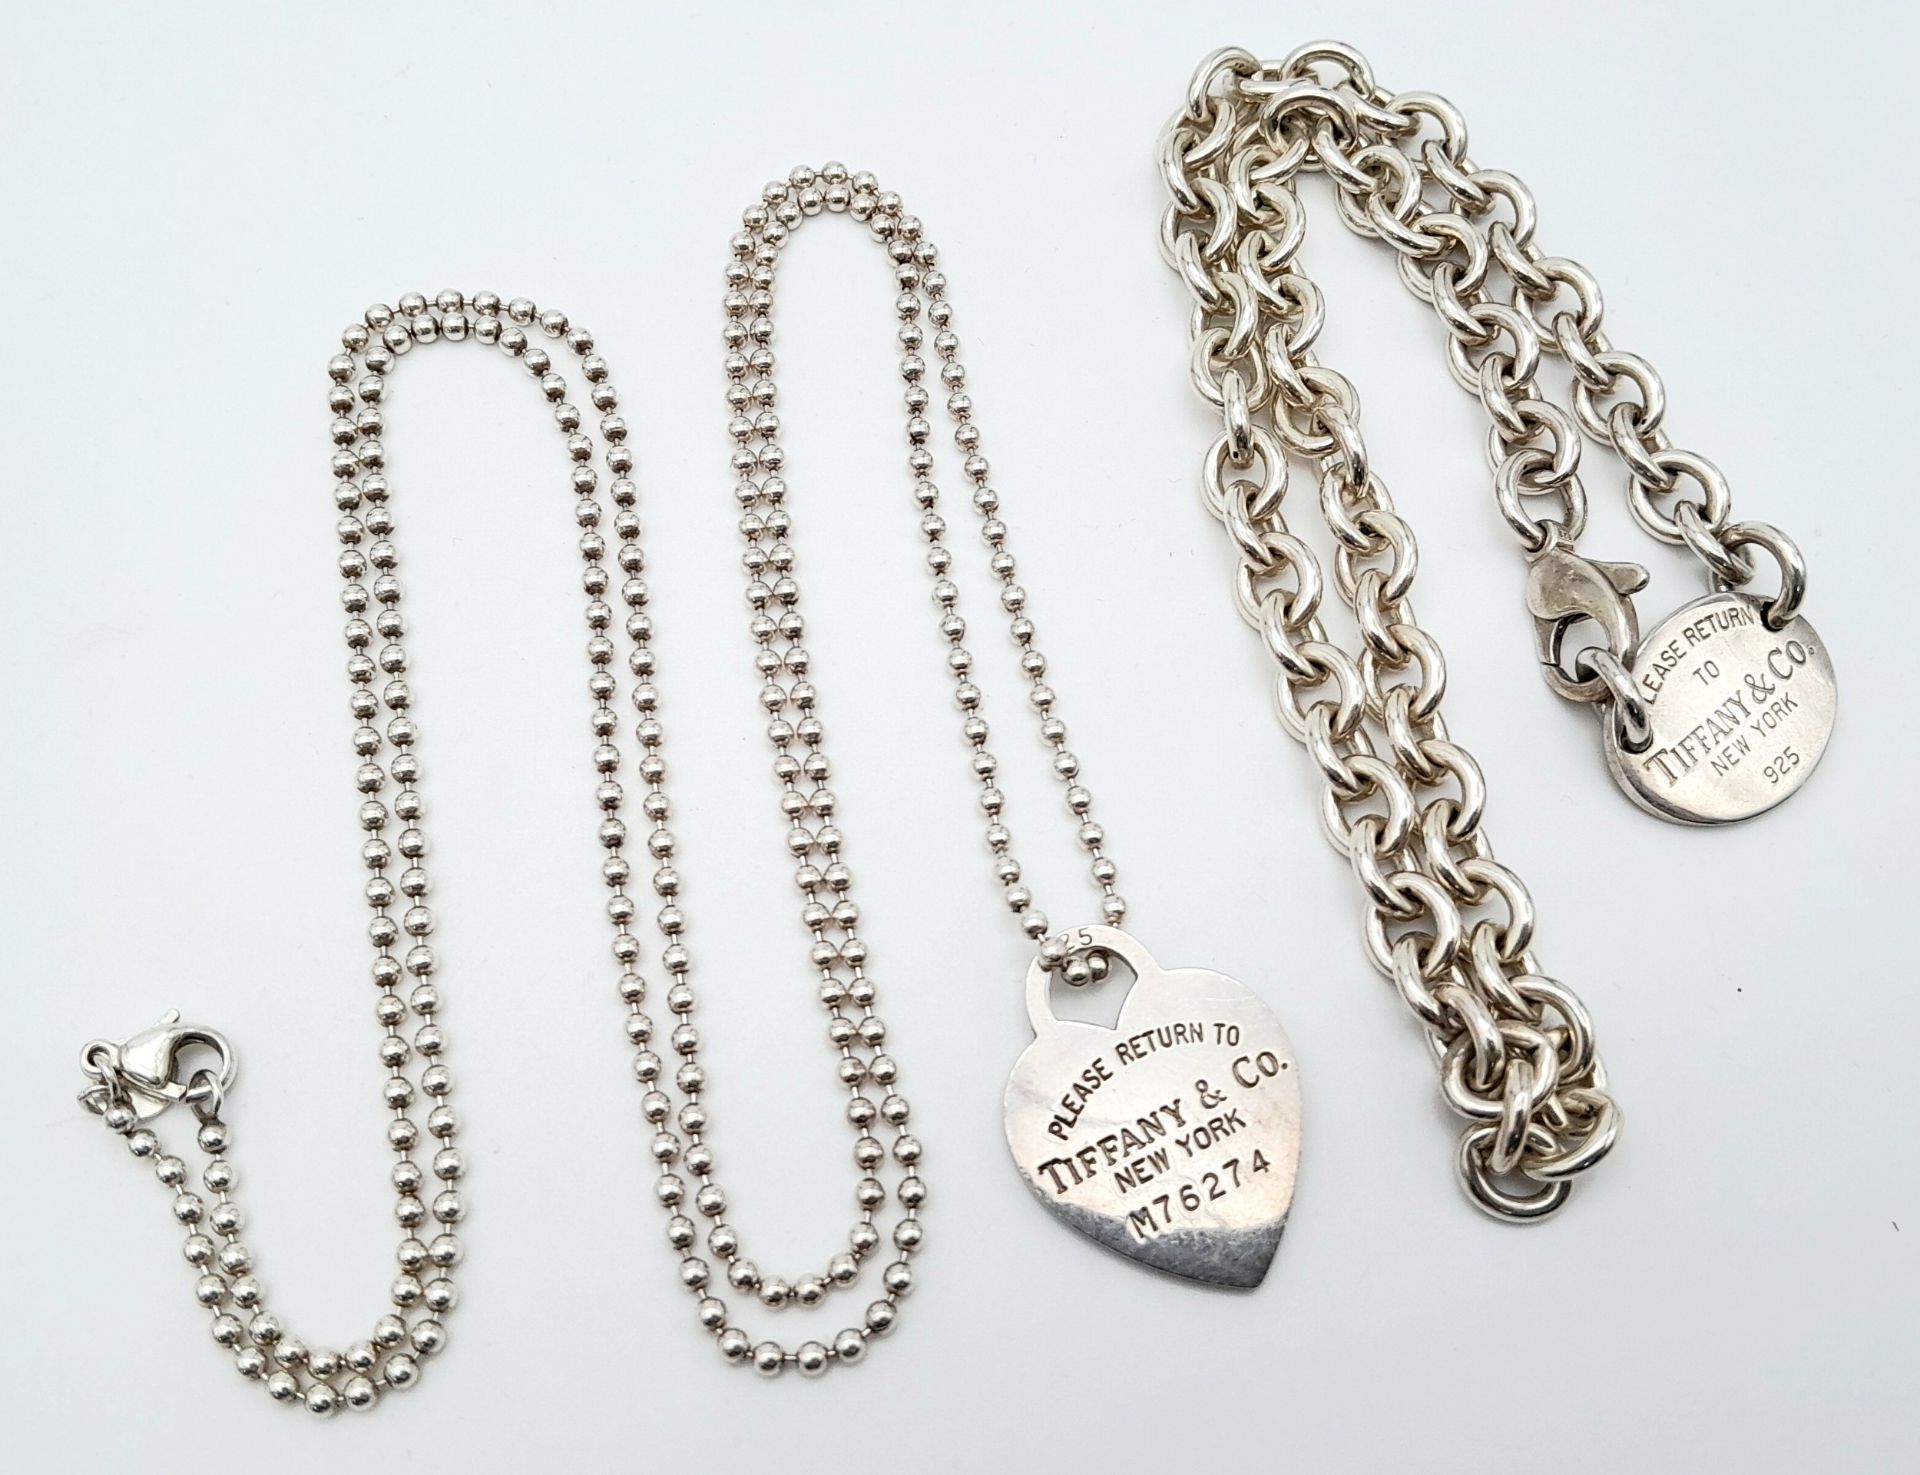 Four Tiffany Items! 2 bracelets and 2 necklaces. A Tiffany belcher link bracelet with heart clasp. A - Image 2 of 7